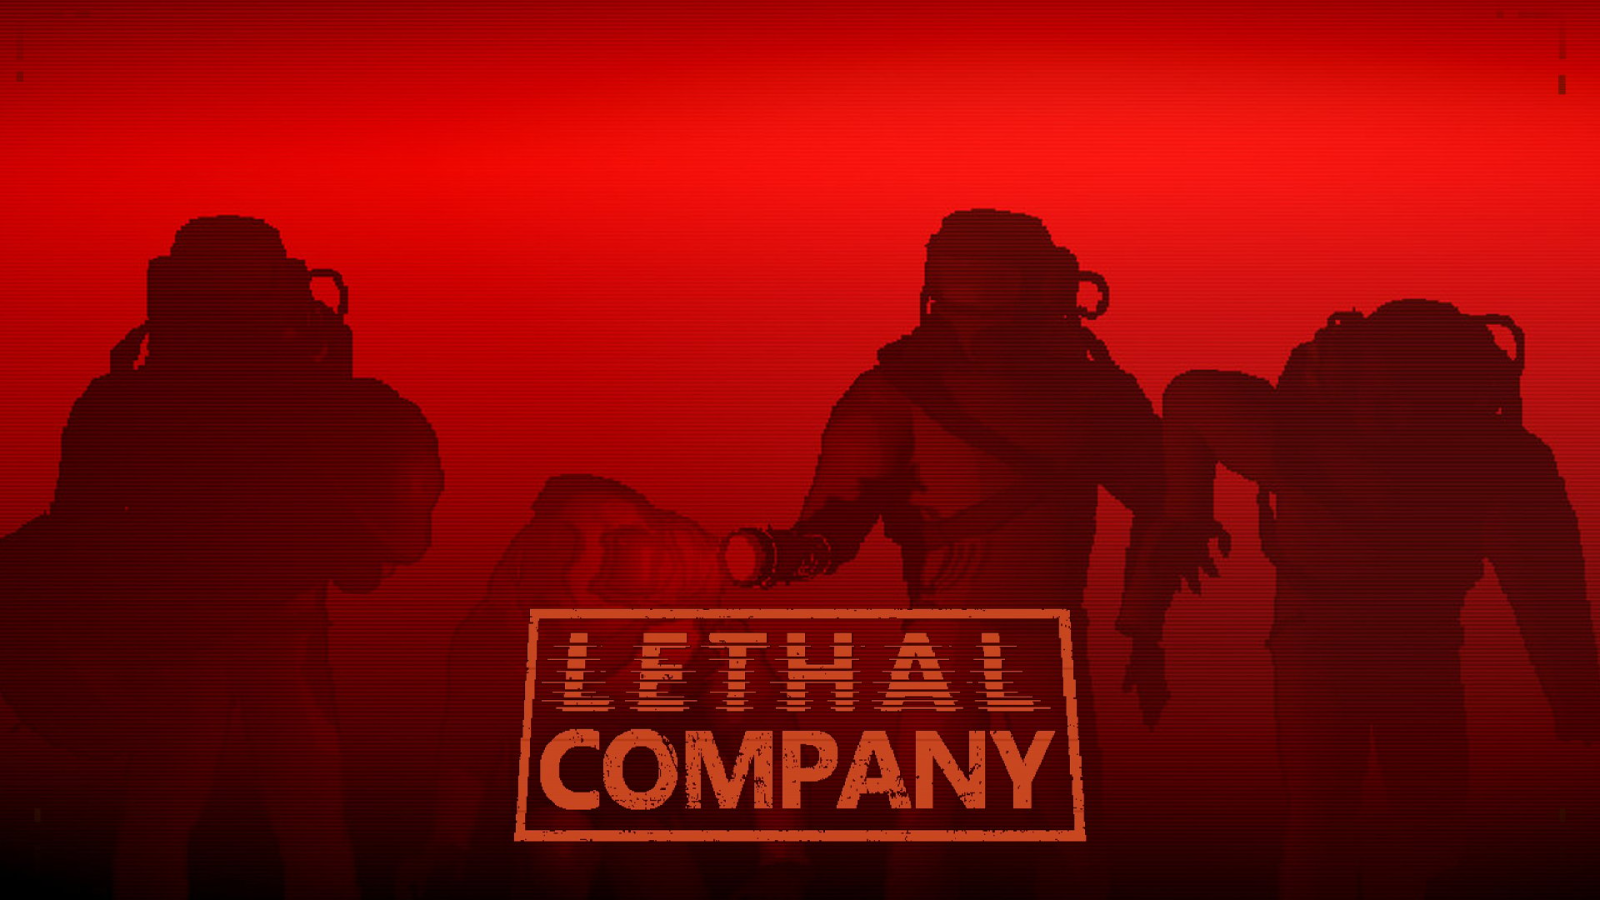 Lethal Company max players  How to mod in more players explained